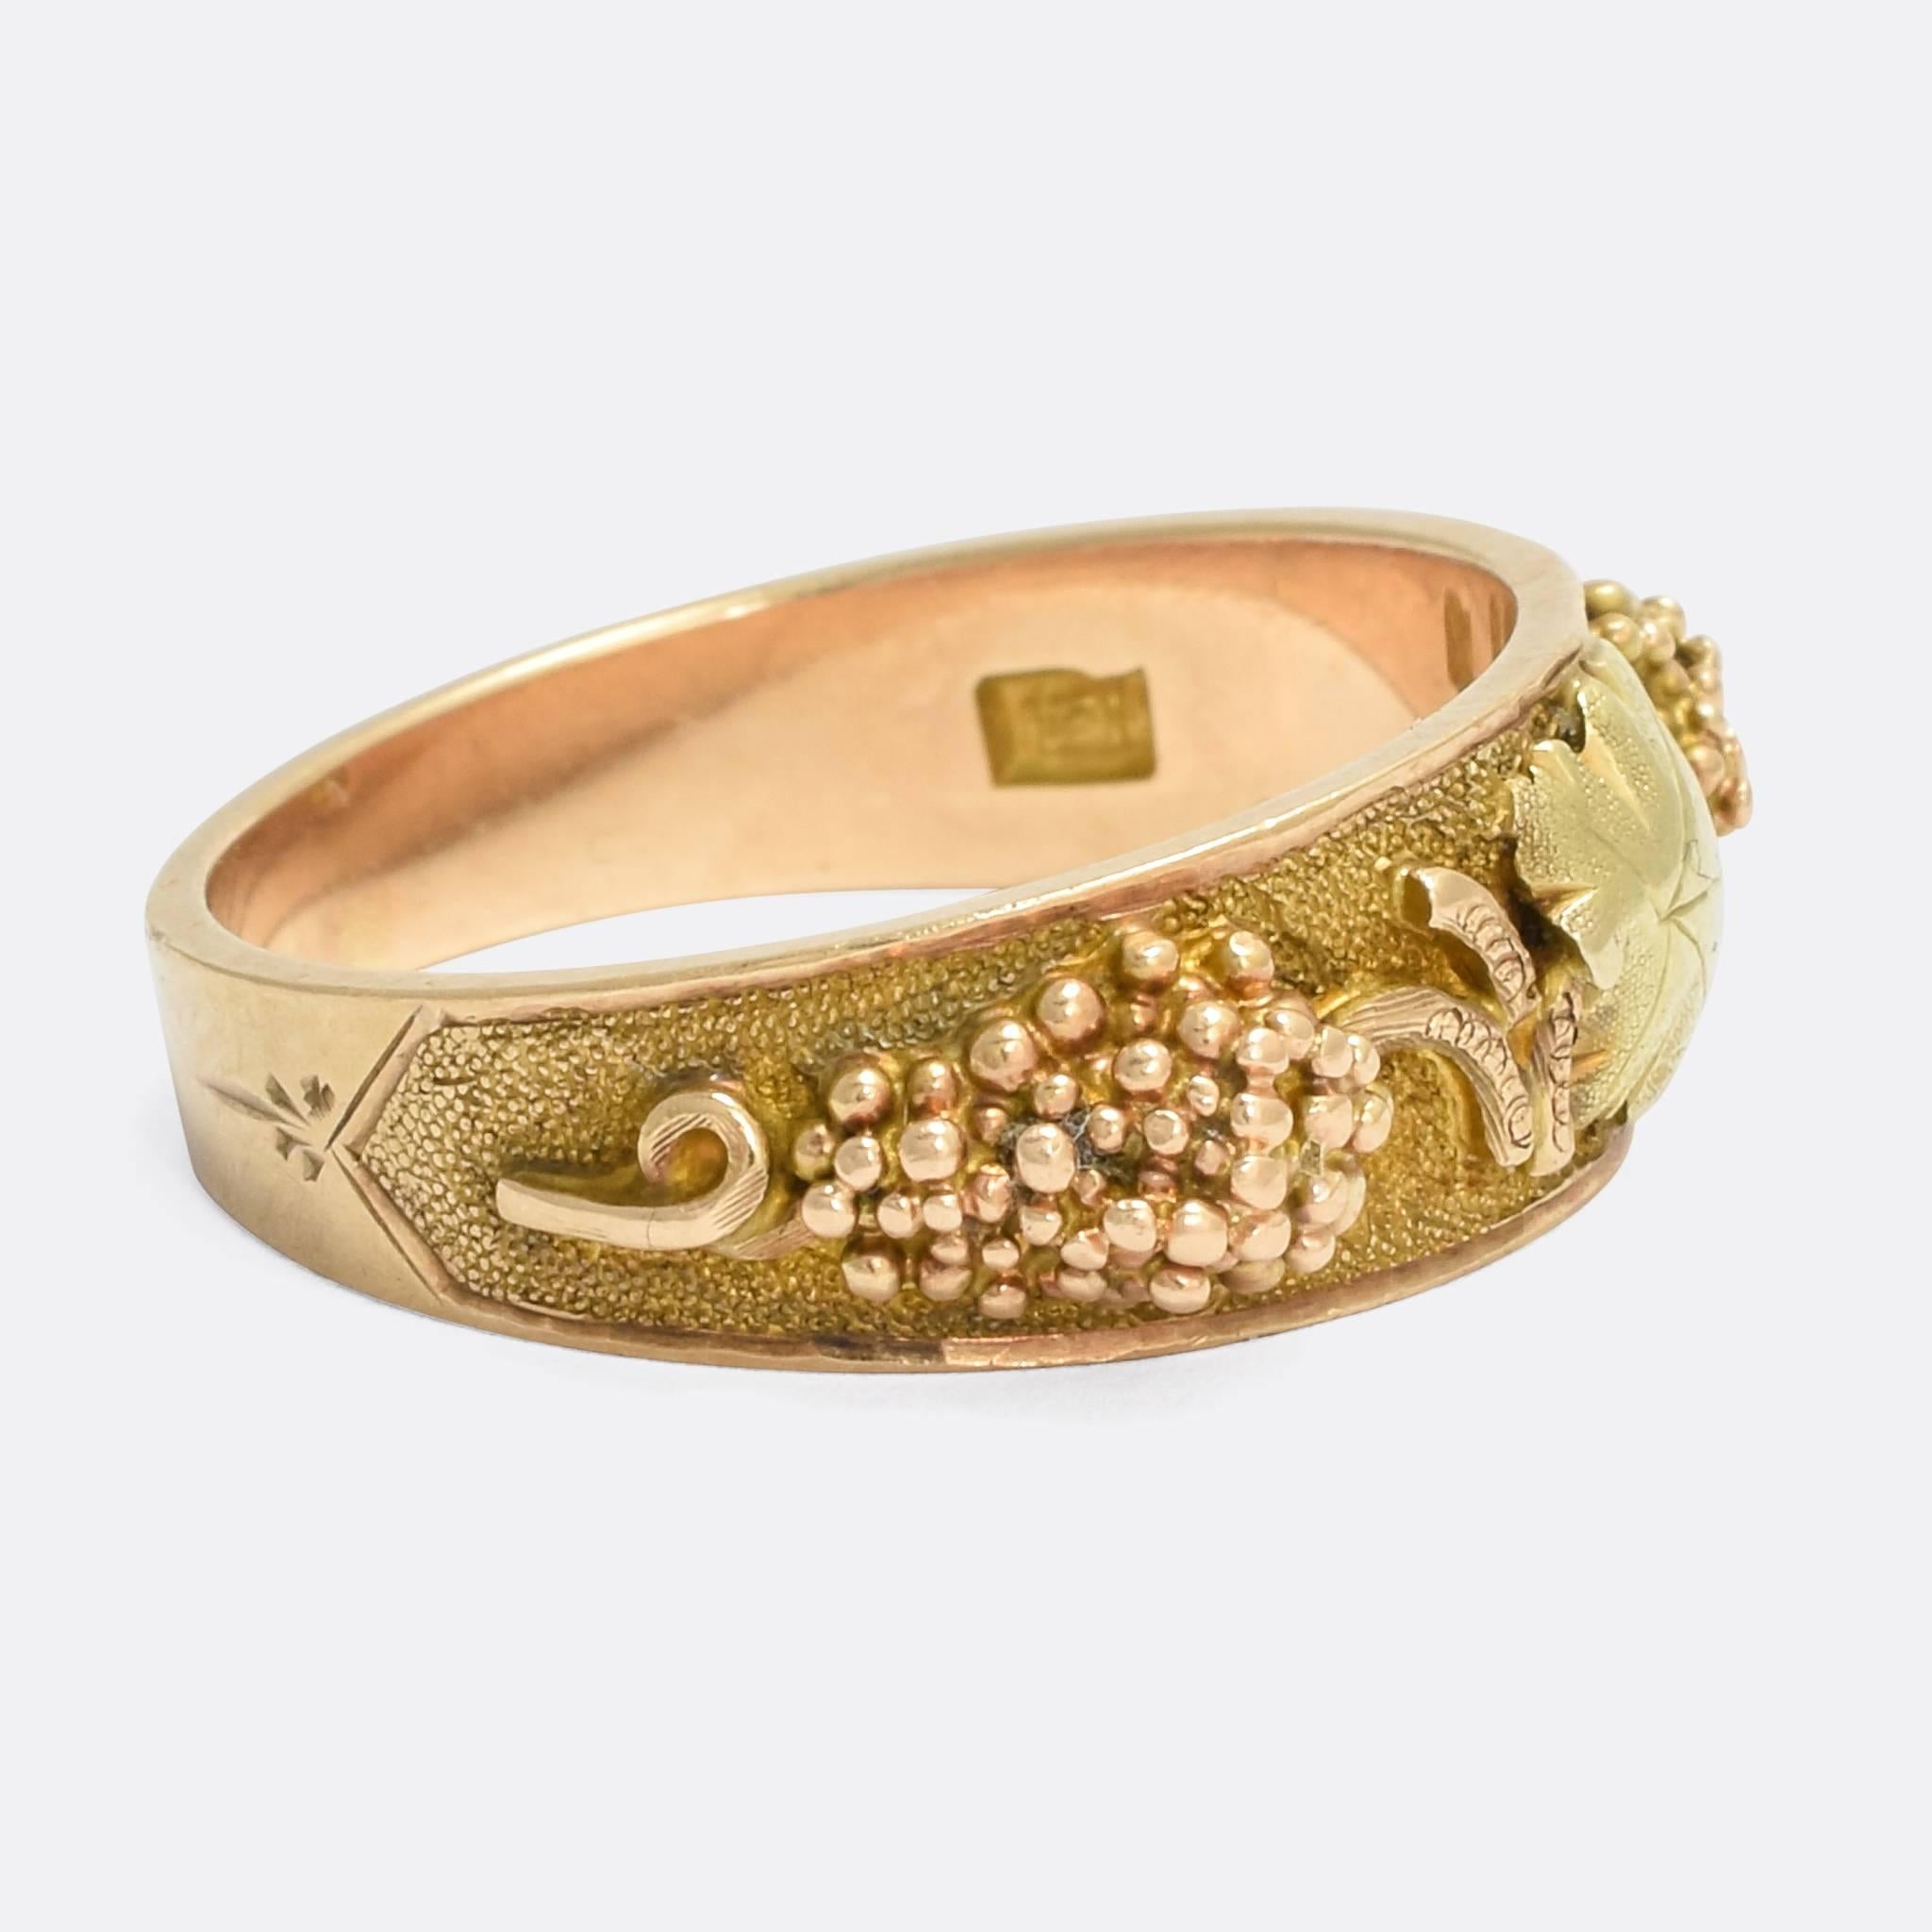 A substantial antique Black Hills Gold ring dating from the Victorian period. It's modelled in 14 karat gold throughout, and the head features the iconic green gold leaf motif, while the shoulders feature grape bunches and vines - the backdrop is